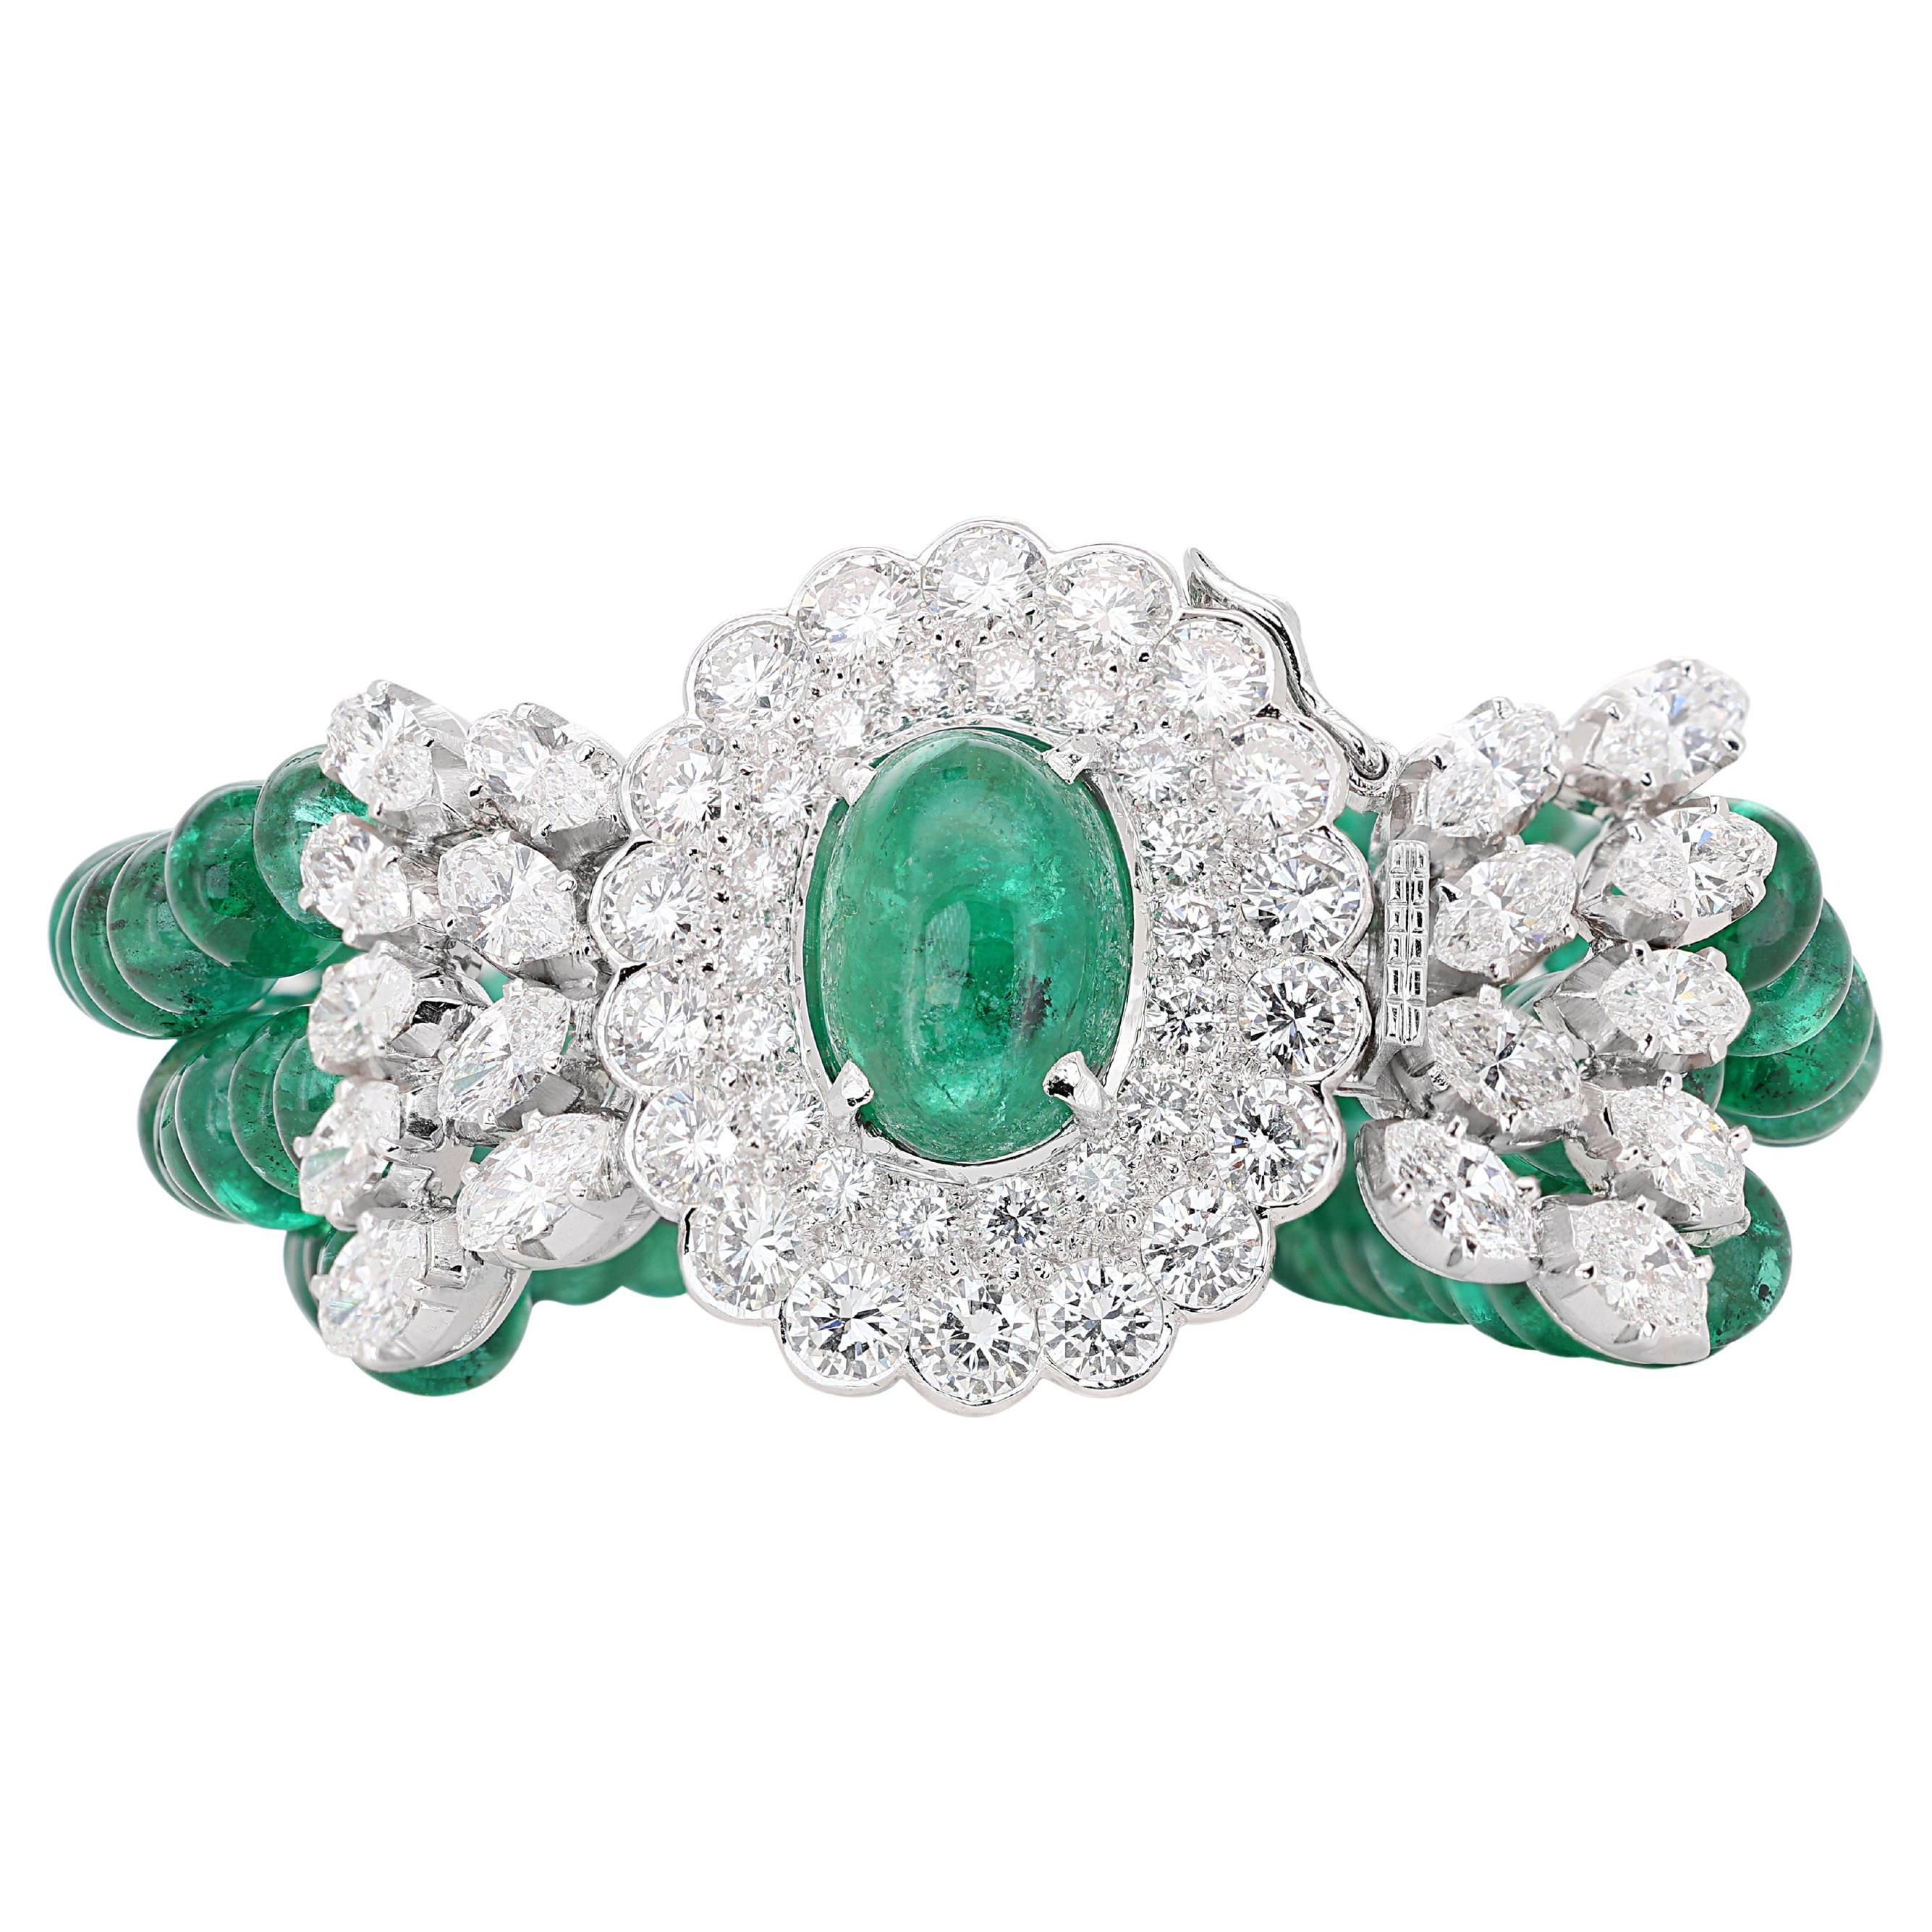 Stunning 4.76ct Emerald Bracelet with Diamonds in 18K White Gold  For Sale